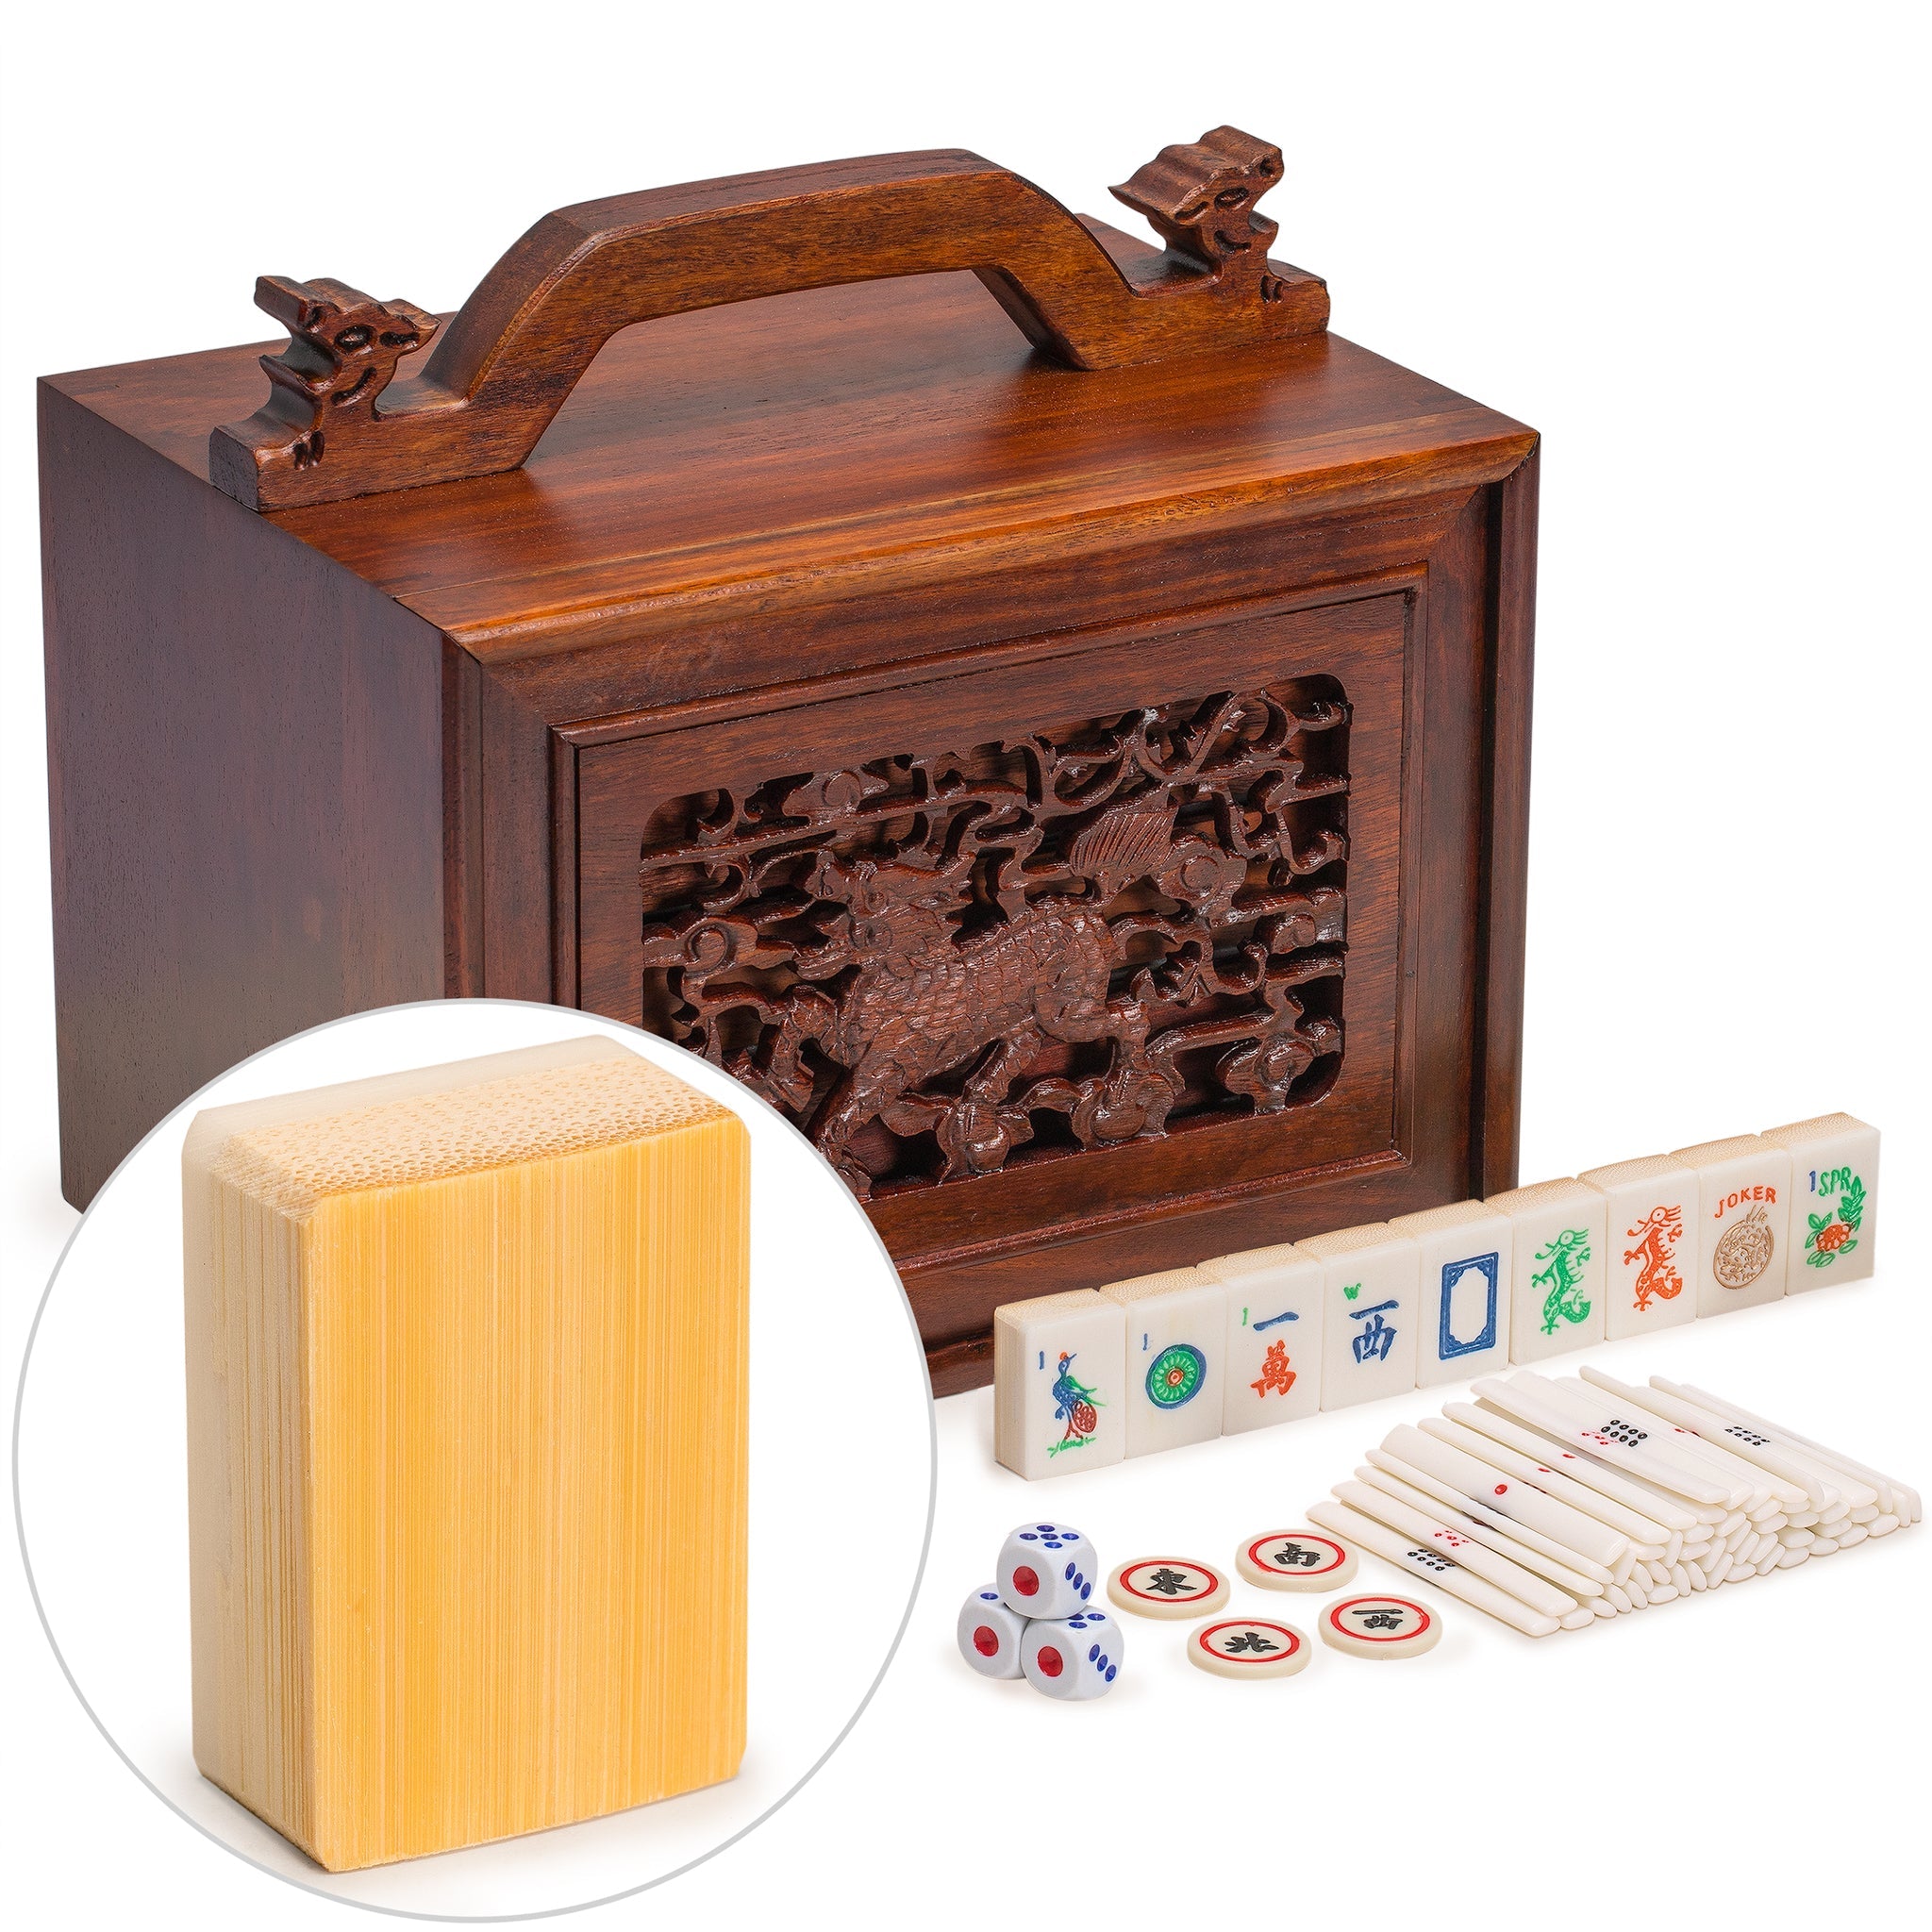 NEW Mahjong Set, Bone and Bamboo Tiles in Rosewood Case - Set Of Betting  Sticks, Dice, New Mahjong Set by Yellow Mountain in Inlaid Wooden Box for  Sale in Seattle, WA - OfferUp